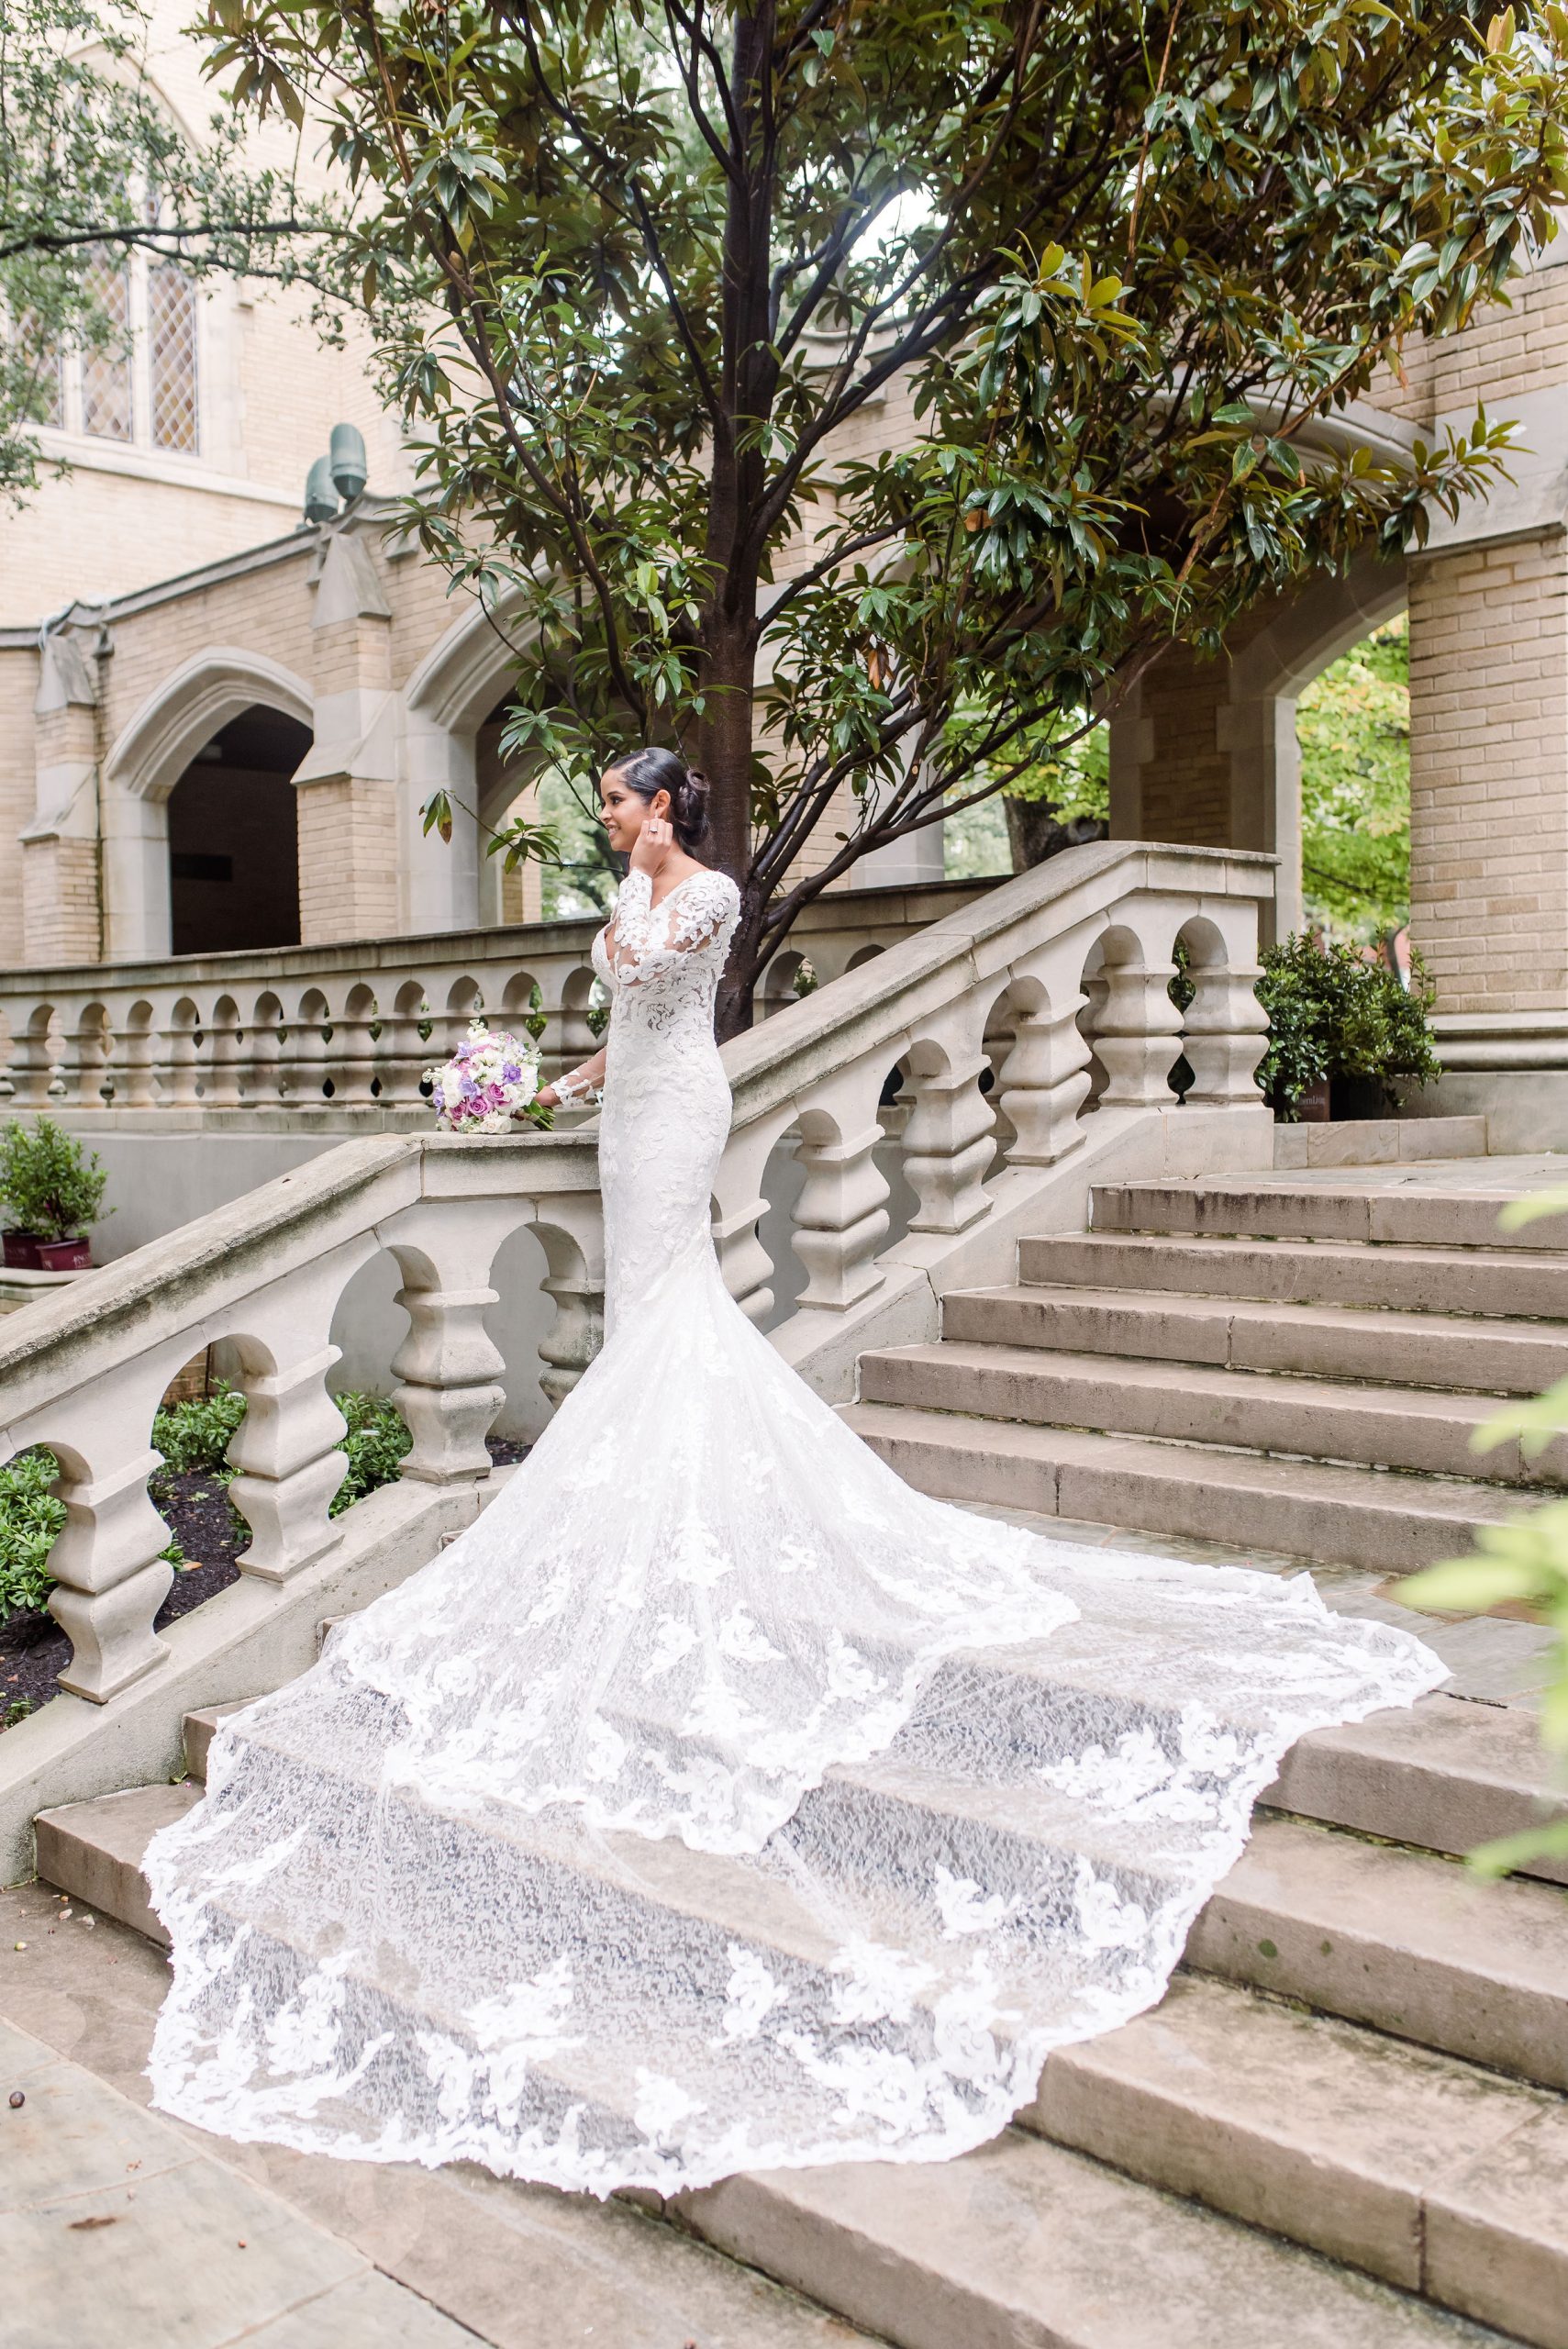 Bride In Quick Delivery Wedding Dress Called Tuscany Royale By Maggie Sottero